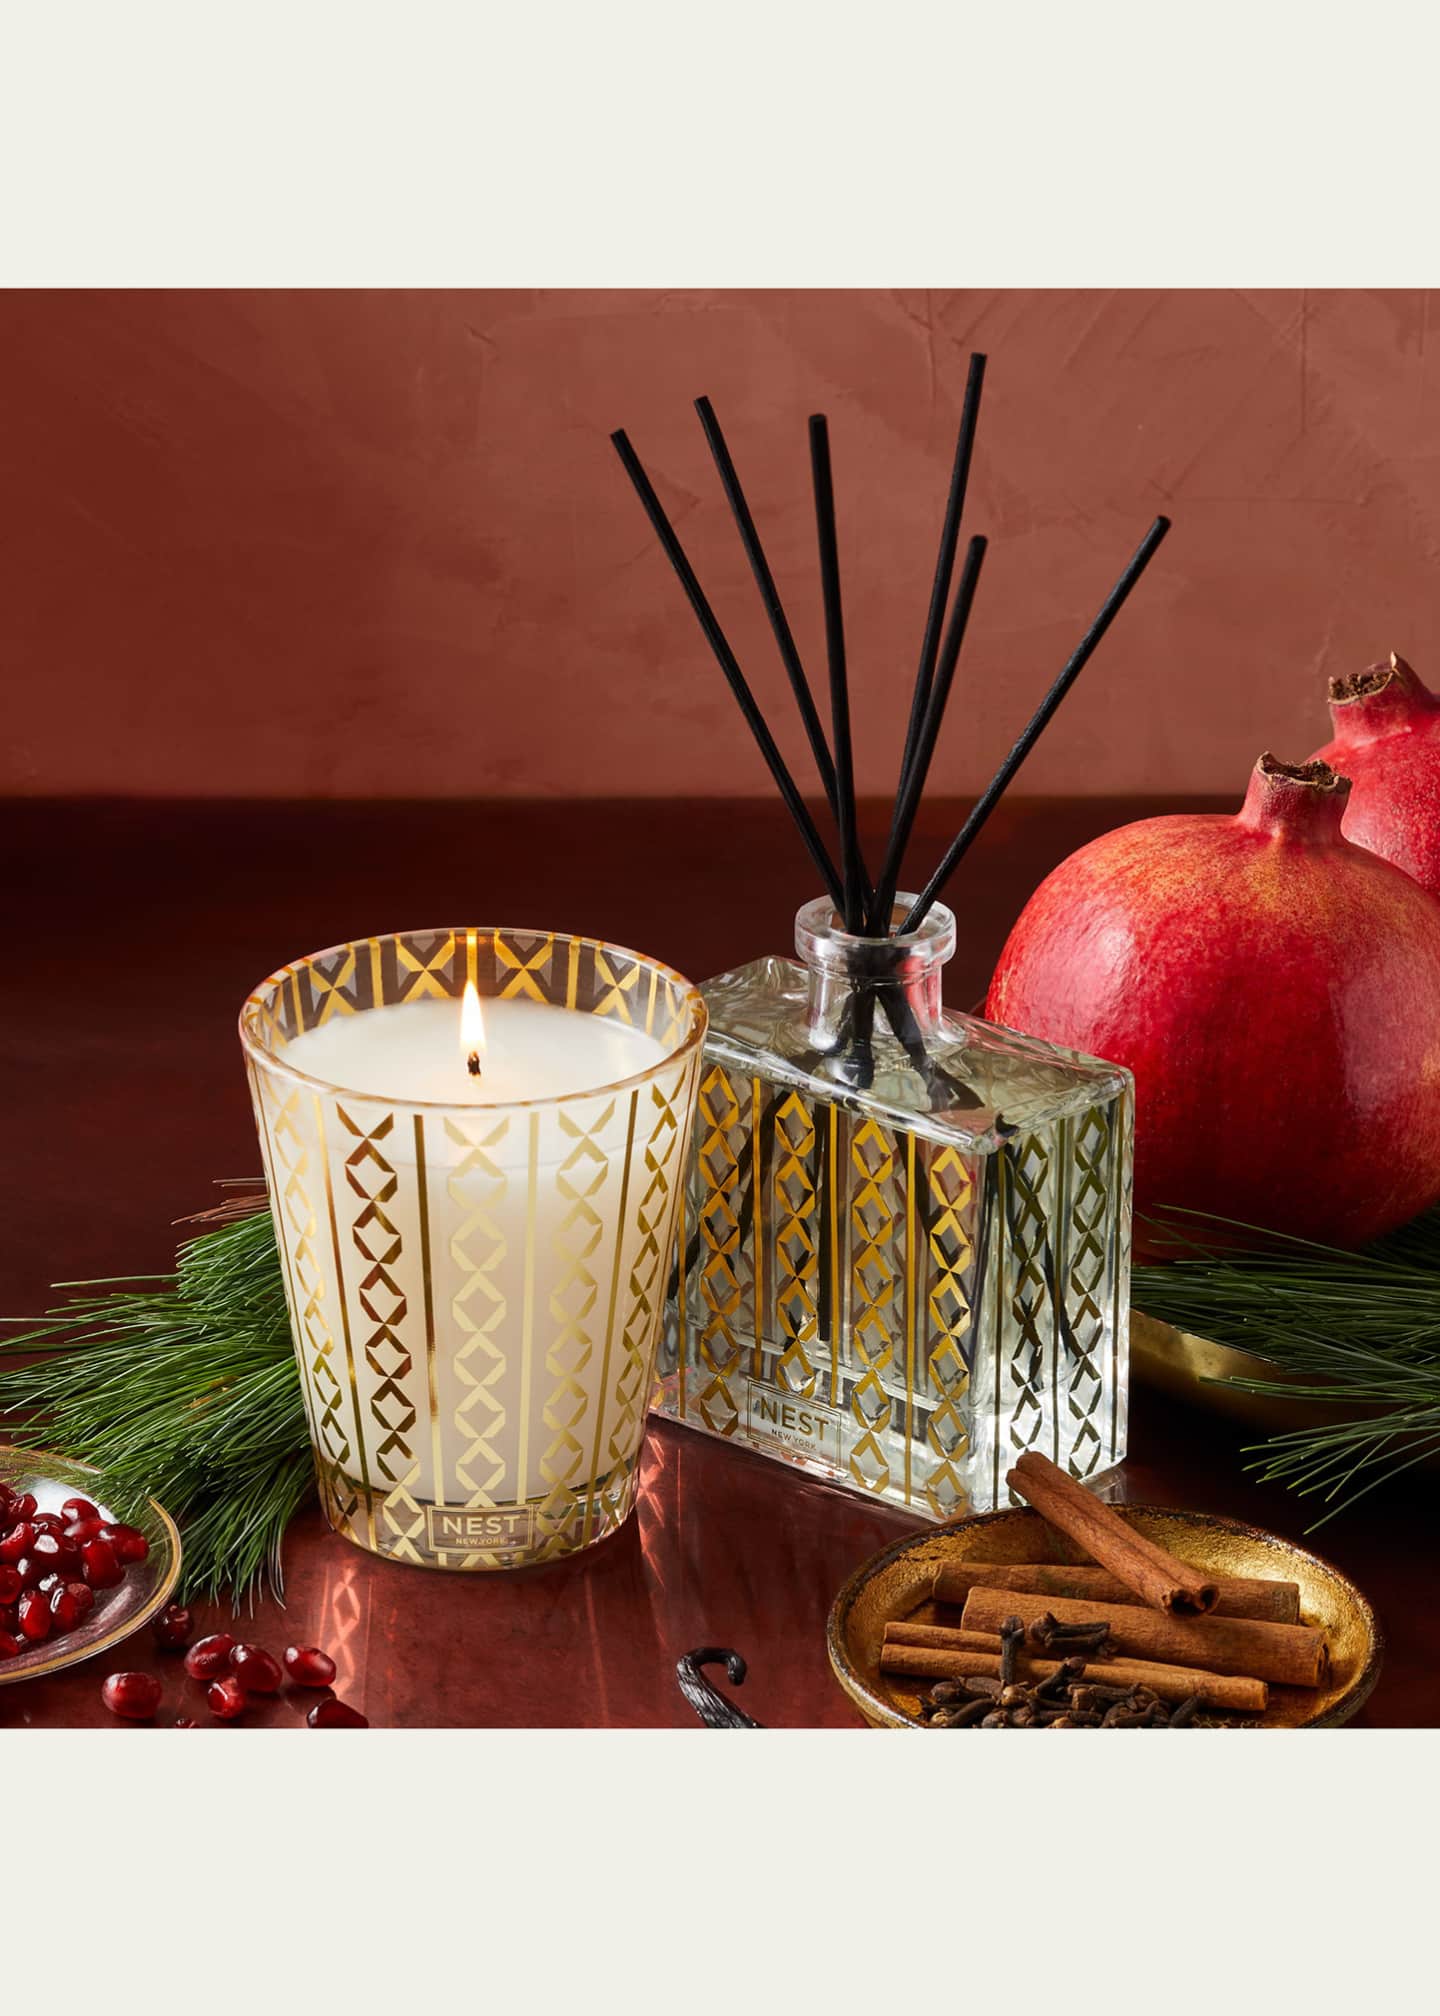 NEST New York 6 oz. Holiday Reed Diffuser Image 2 of 5